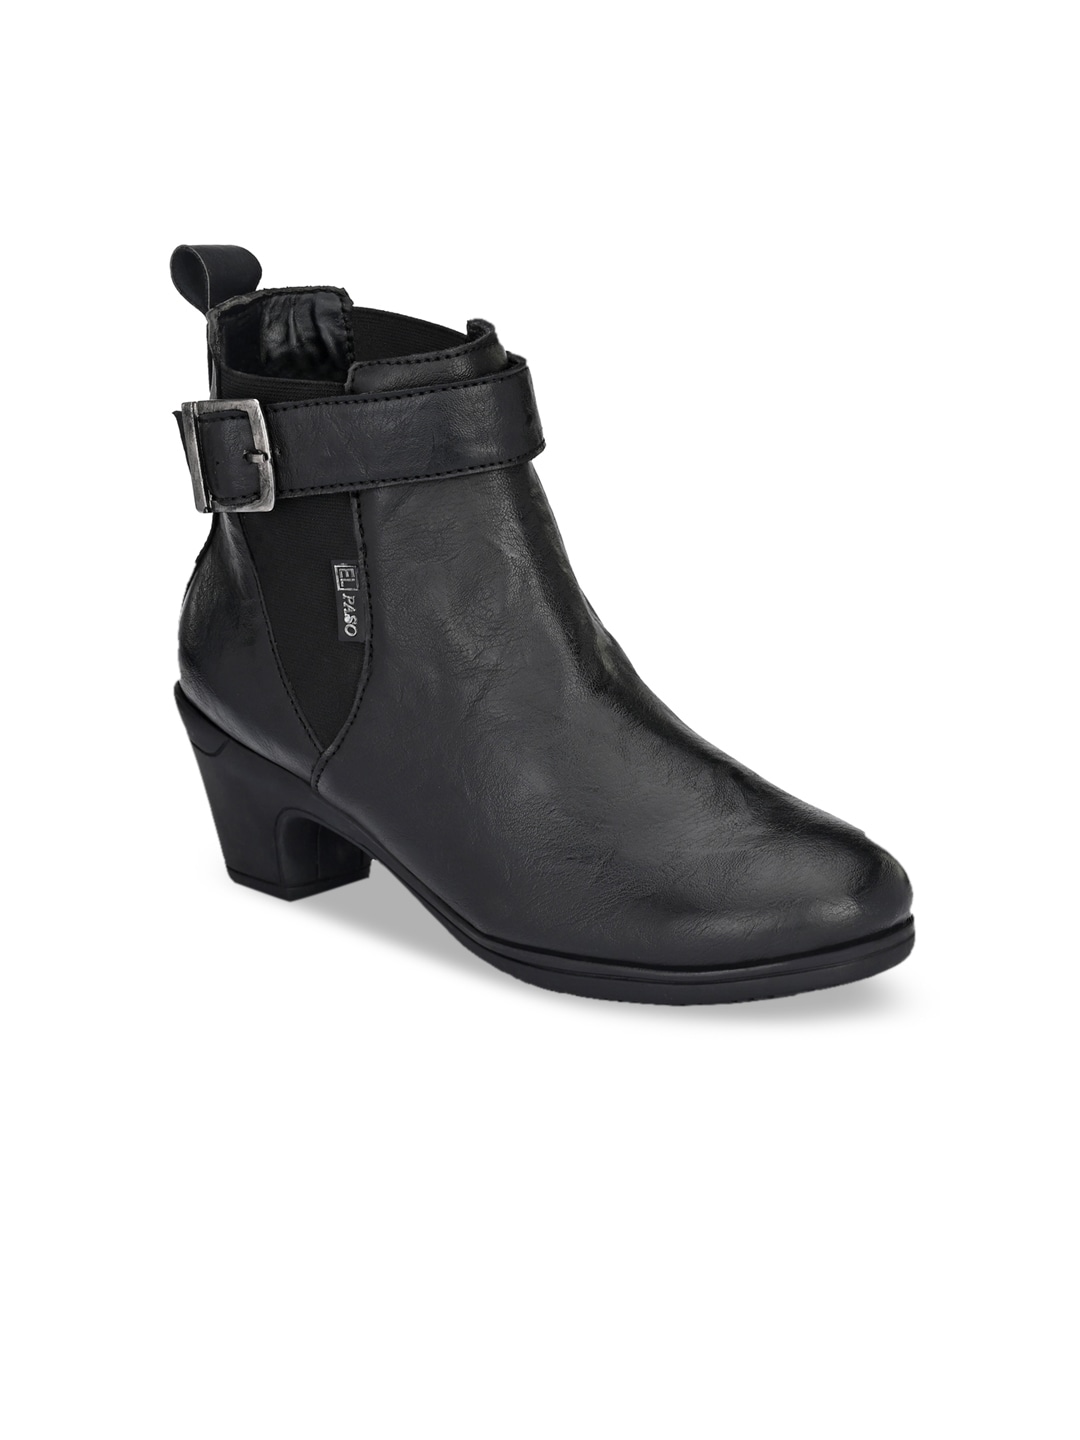 El Paso Women Black Solid Heeled Boots Price in India